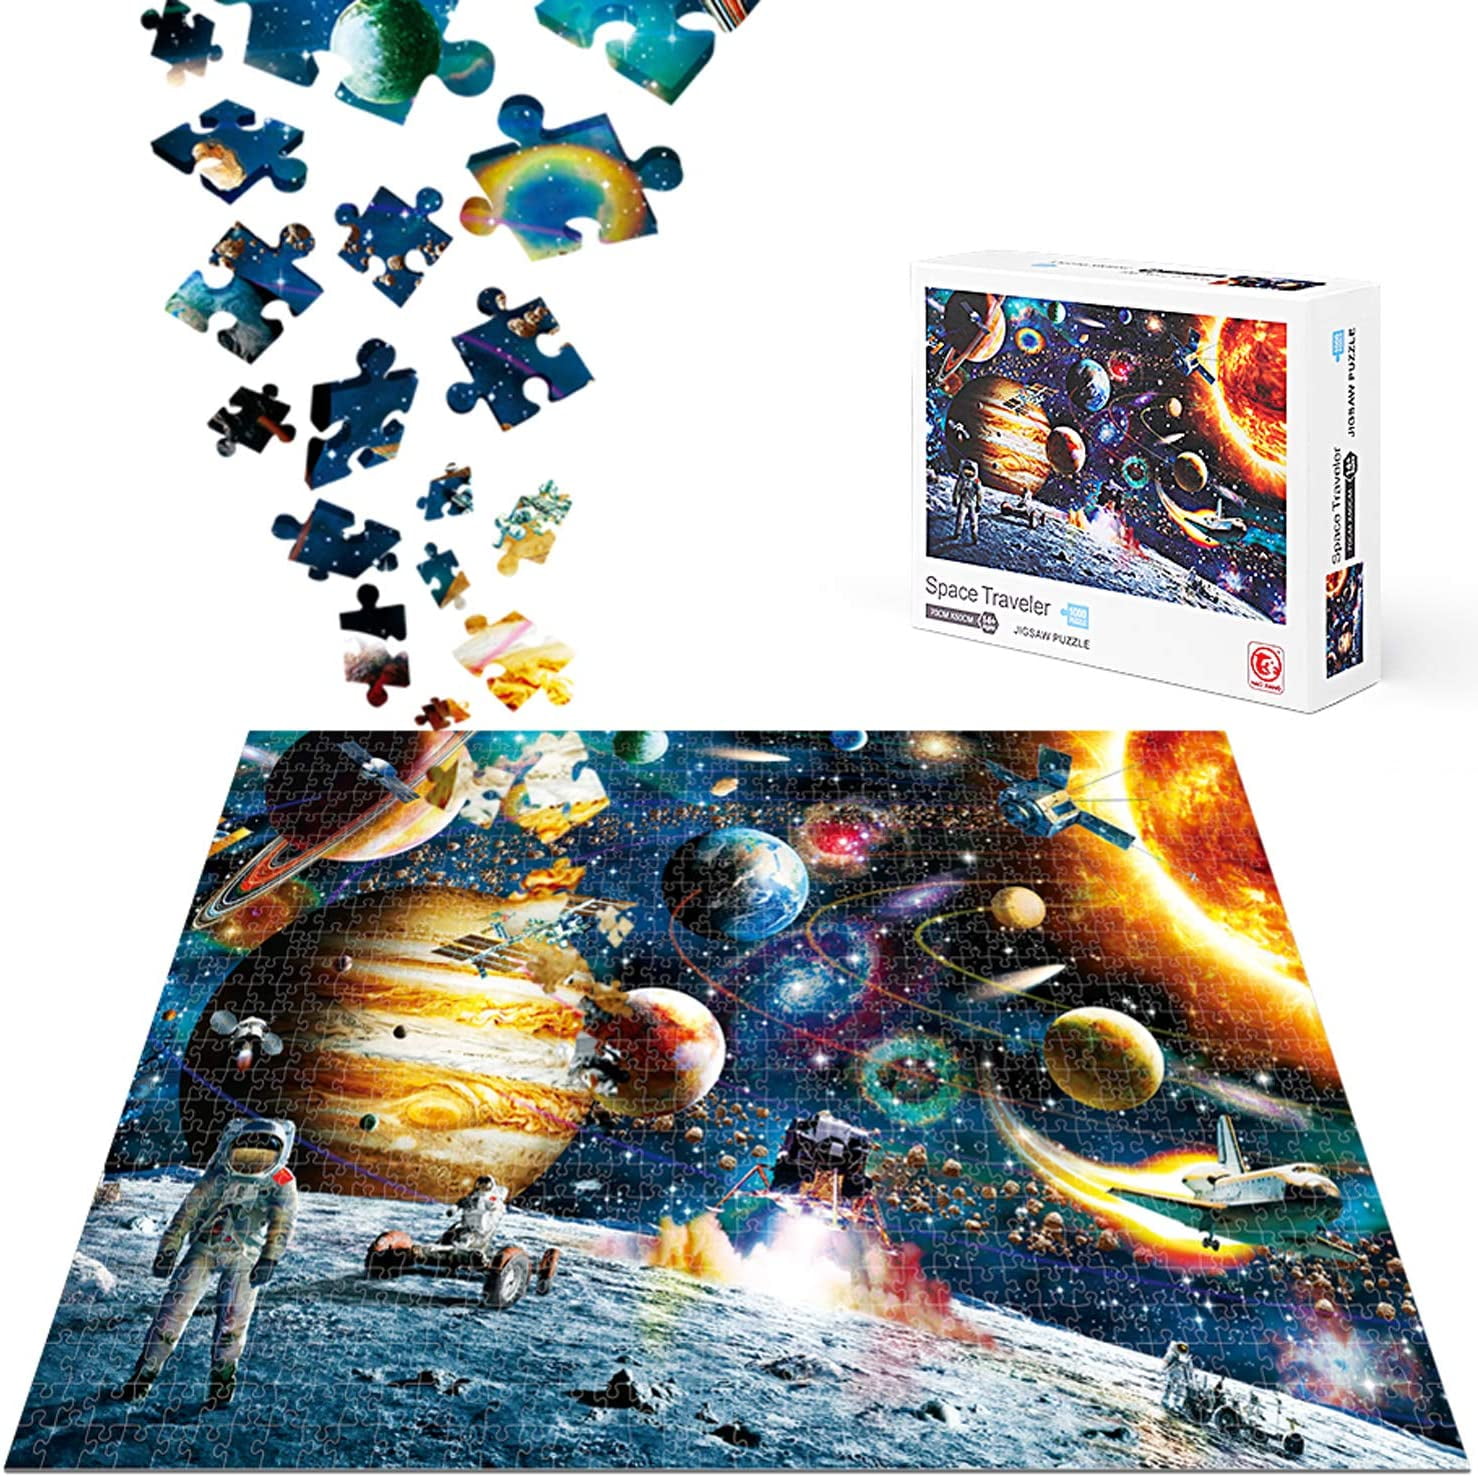 Jigsaw Puzzles 1000 Pieces for Adults Outer Space Solar System Adult Puzzle Challenge Educational Intellectual 1000 Piece Puzzles 